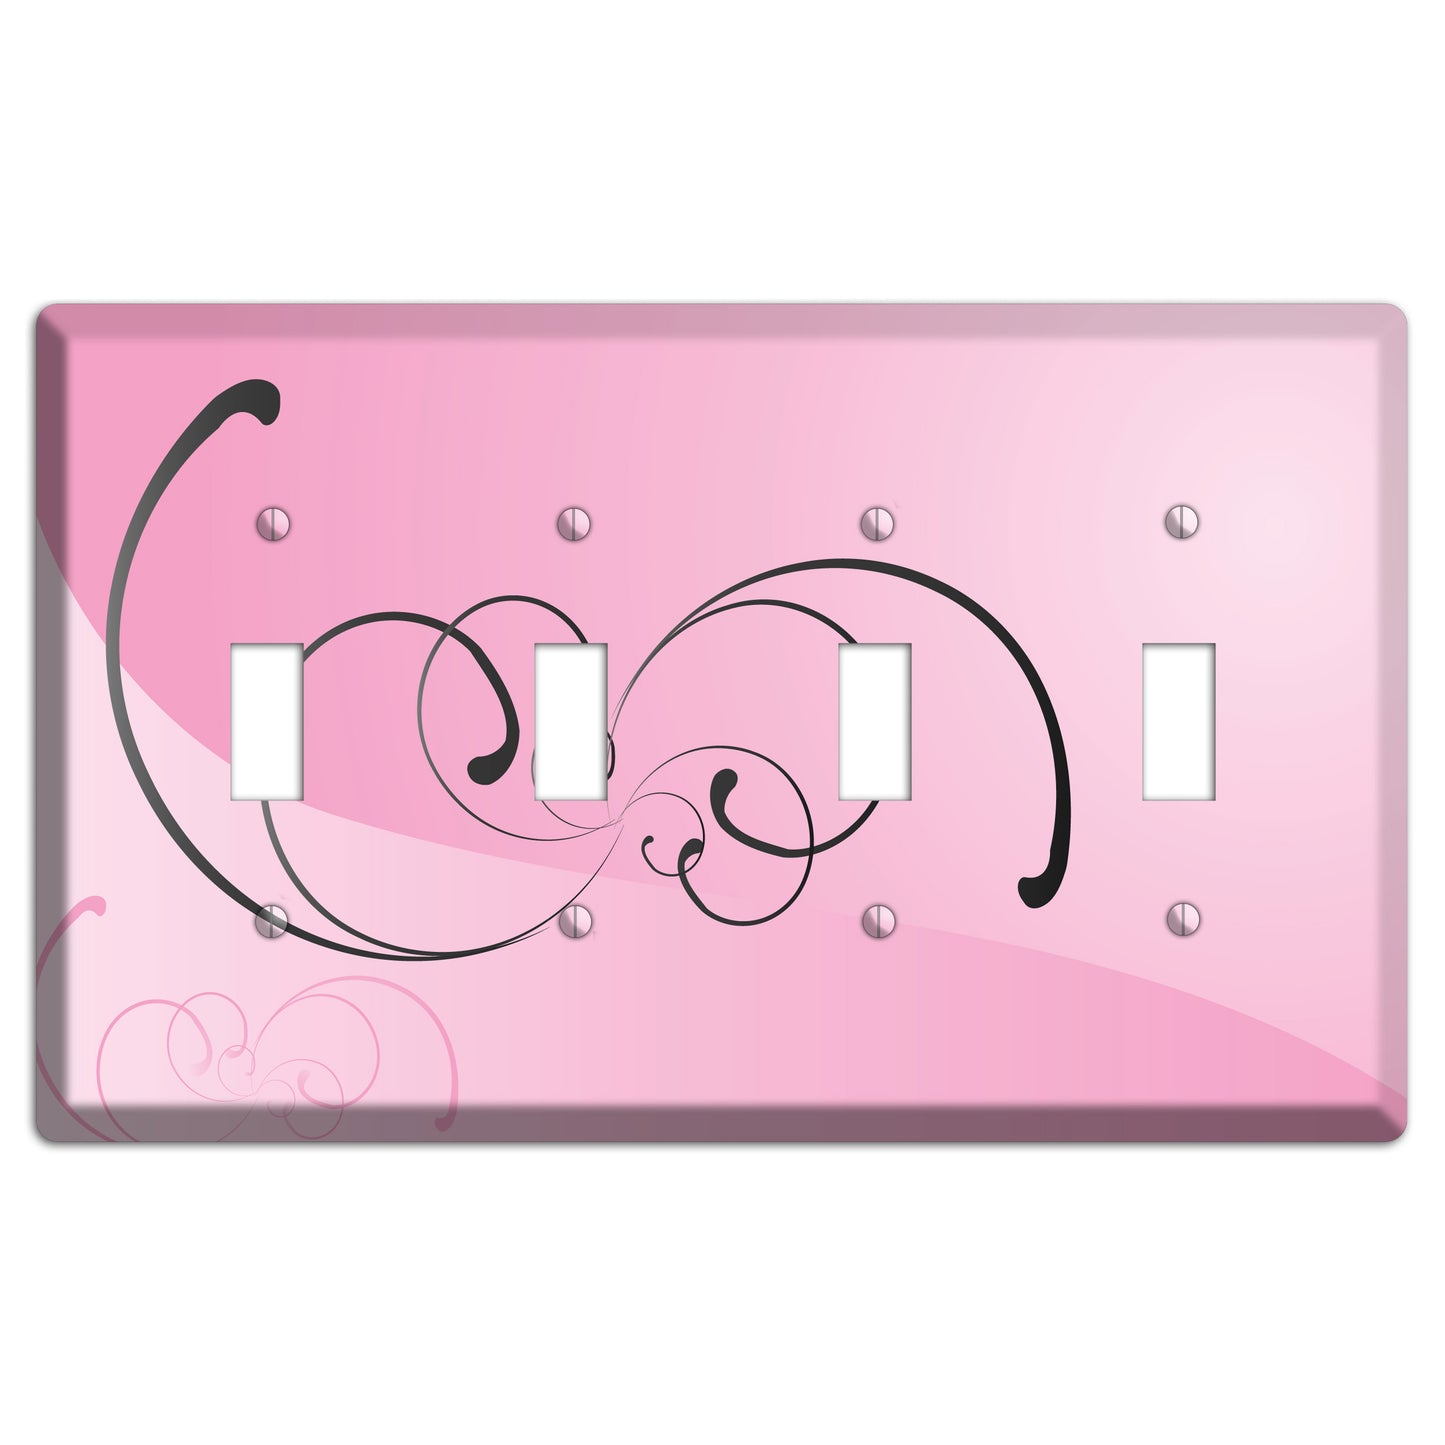 Pink Swoop 4 Toggle Wallplate